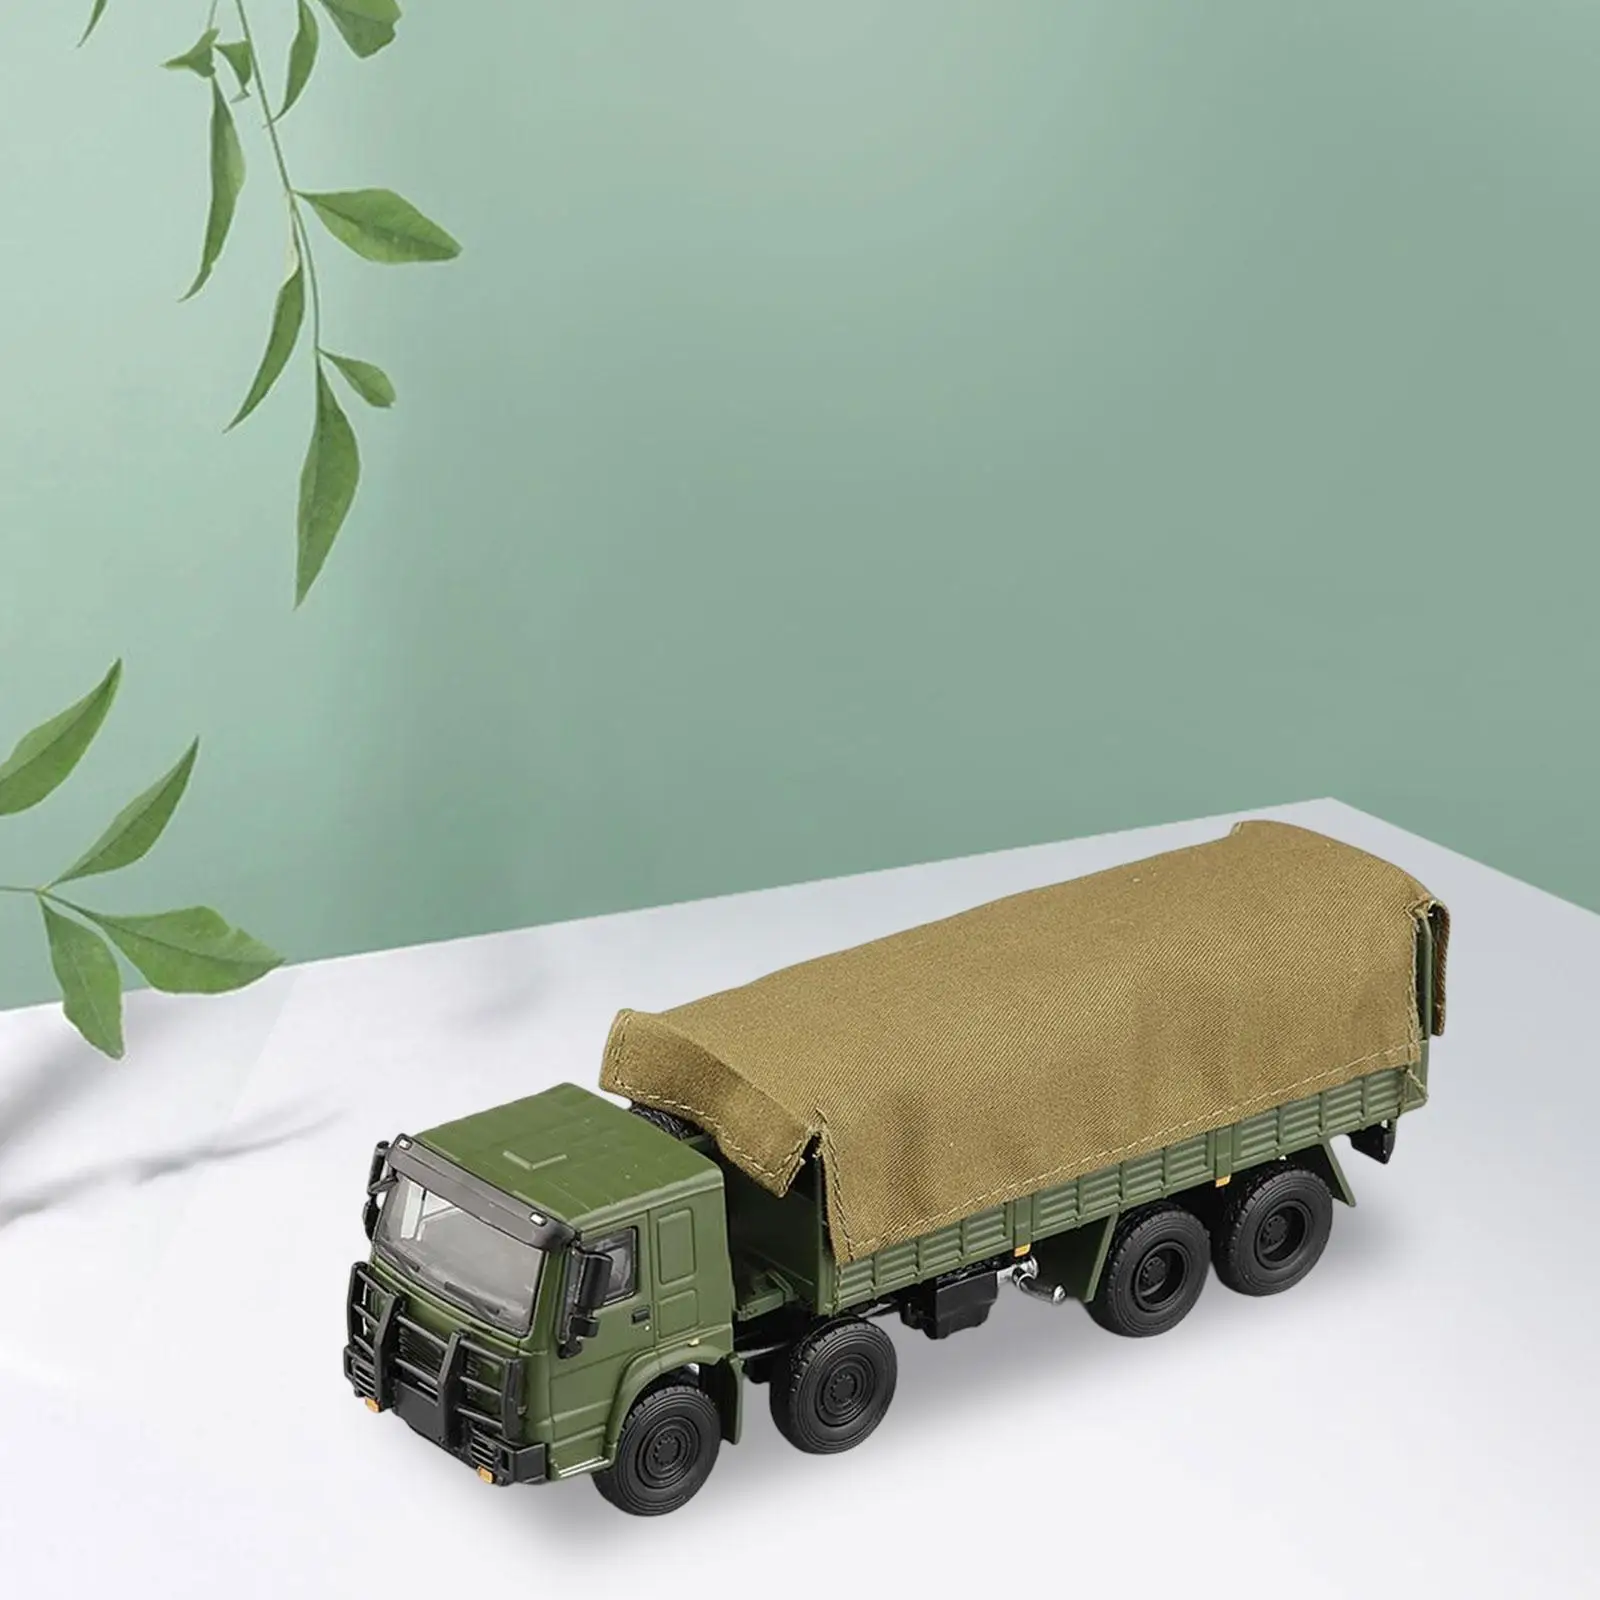 1:64 Diorama Street Car Model Sand Table Ornament Collectible Vehicles for Photography Props Diorama DIY Scene Layout Decor